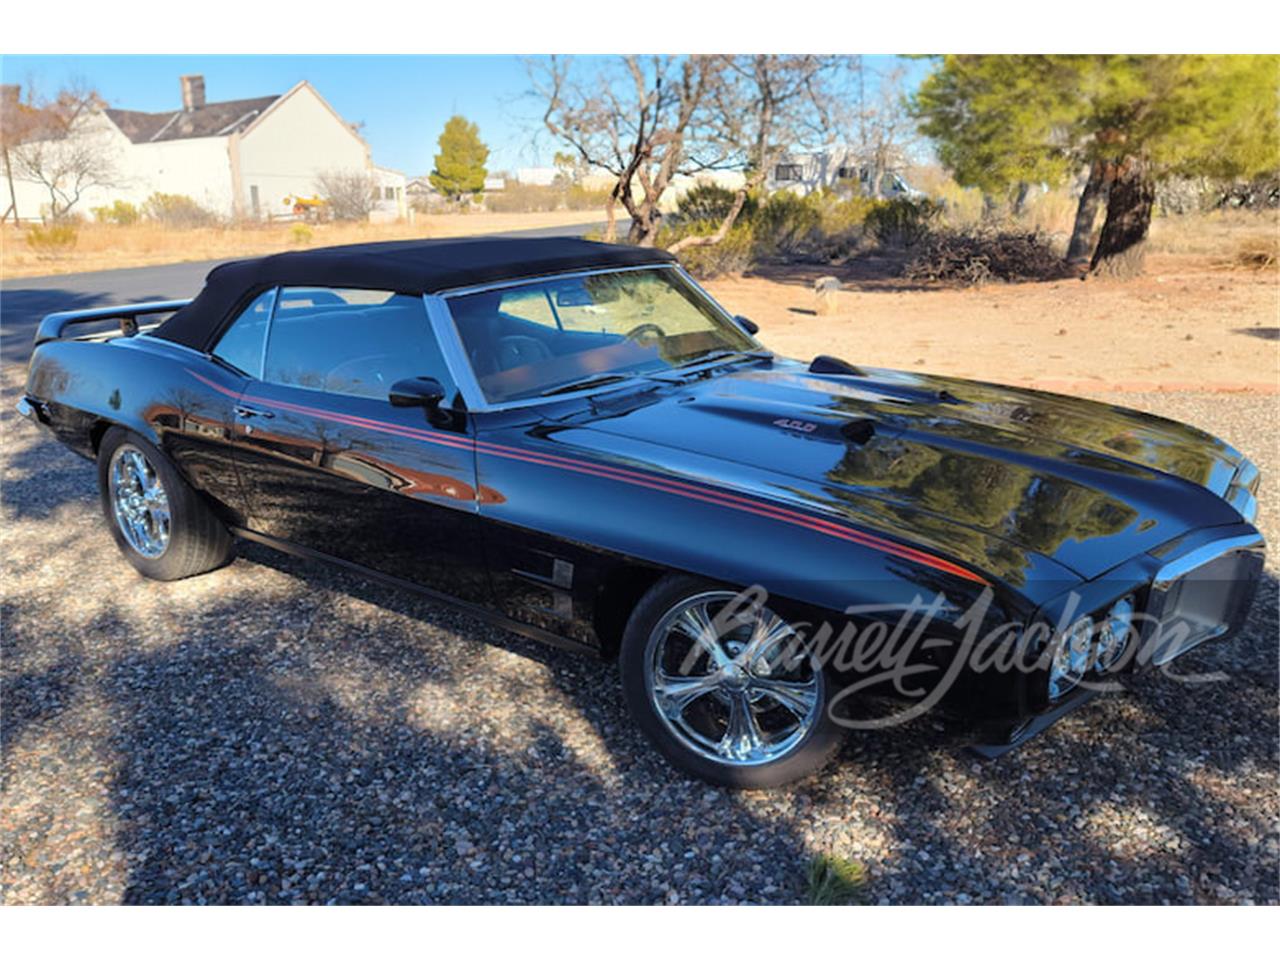 For Sale at Auction: 1969 Pontiac Firebird in Scottsdale, Arizona for sale in Scottsdale, AZ